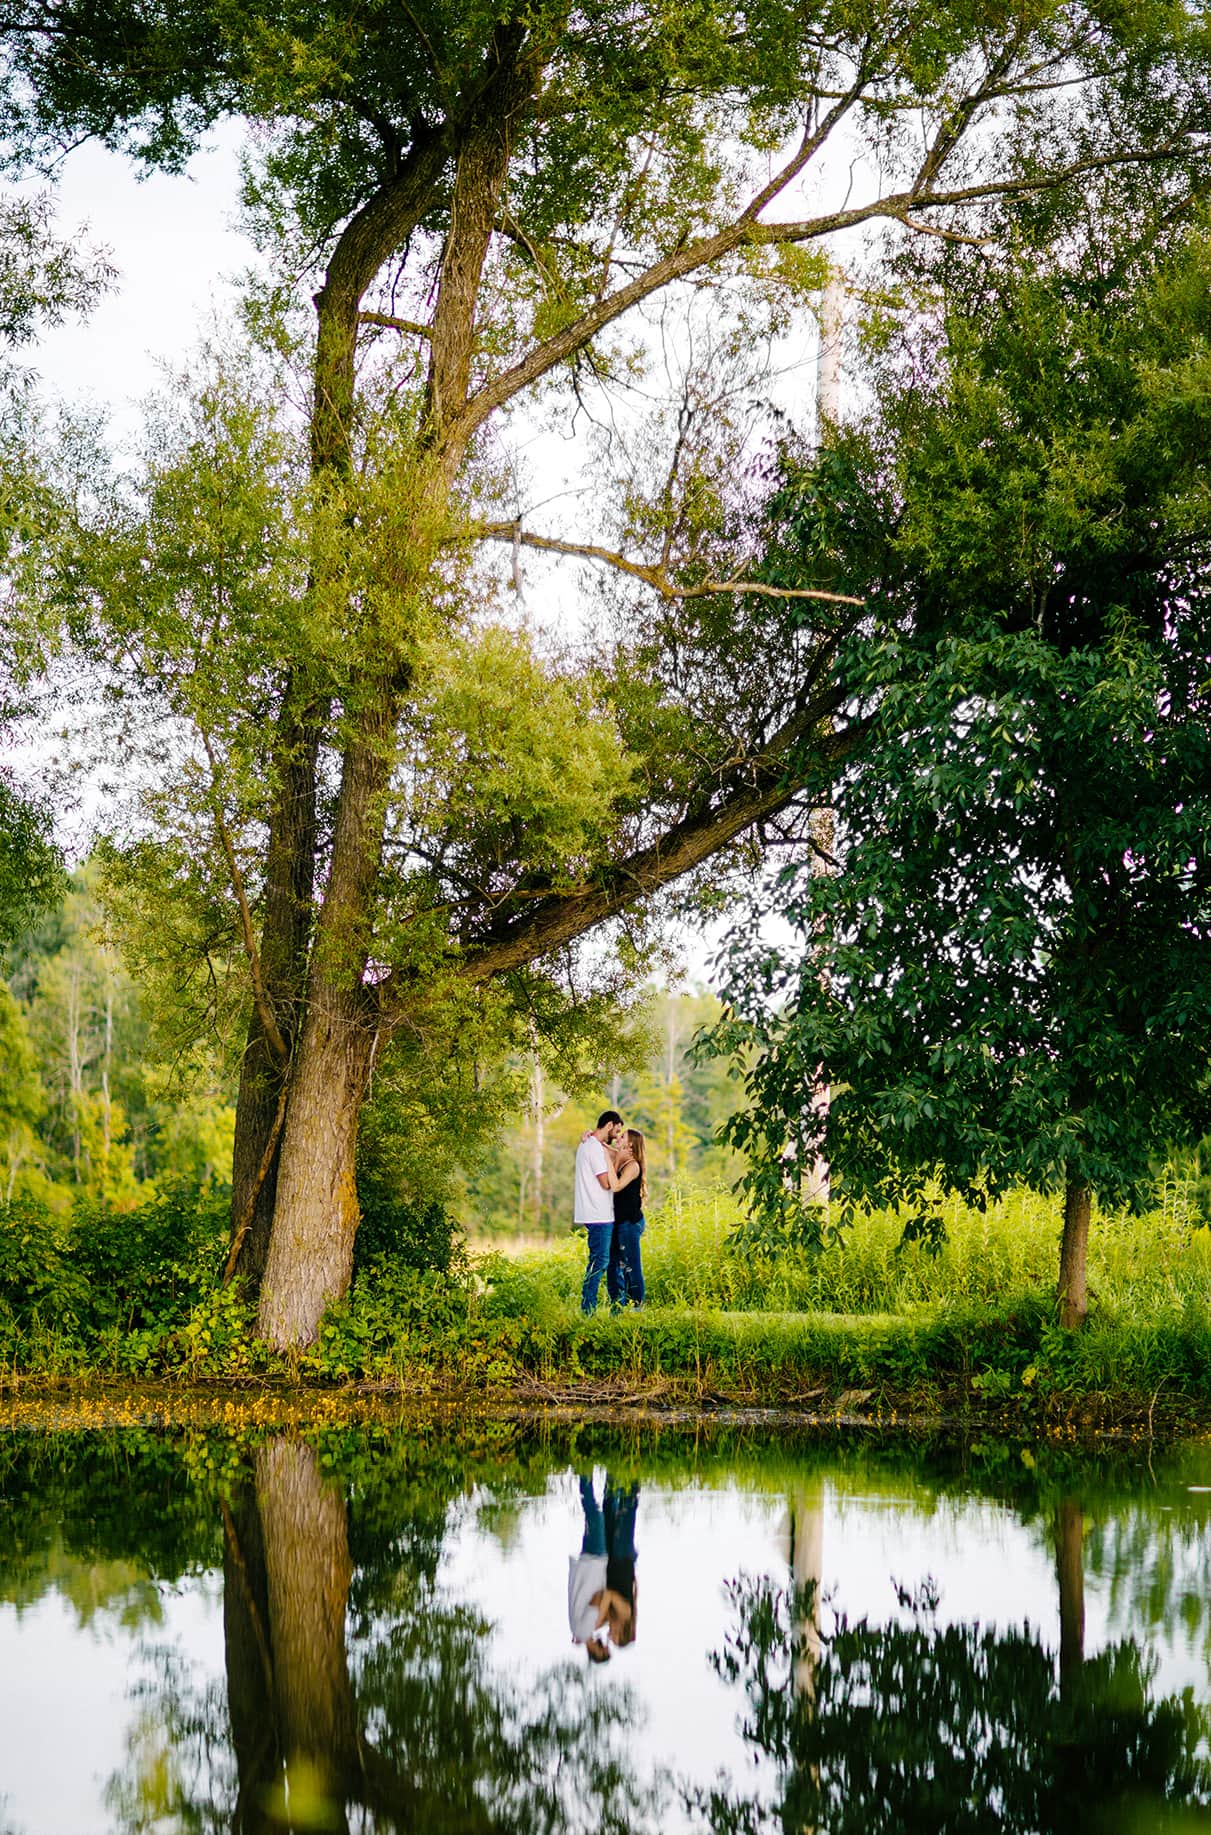 couple embraces between trees next to pond and their reflection is mirrored in the water Albany NY